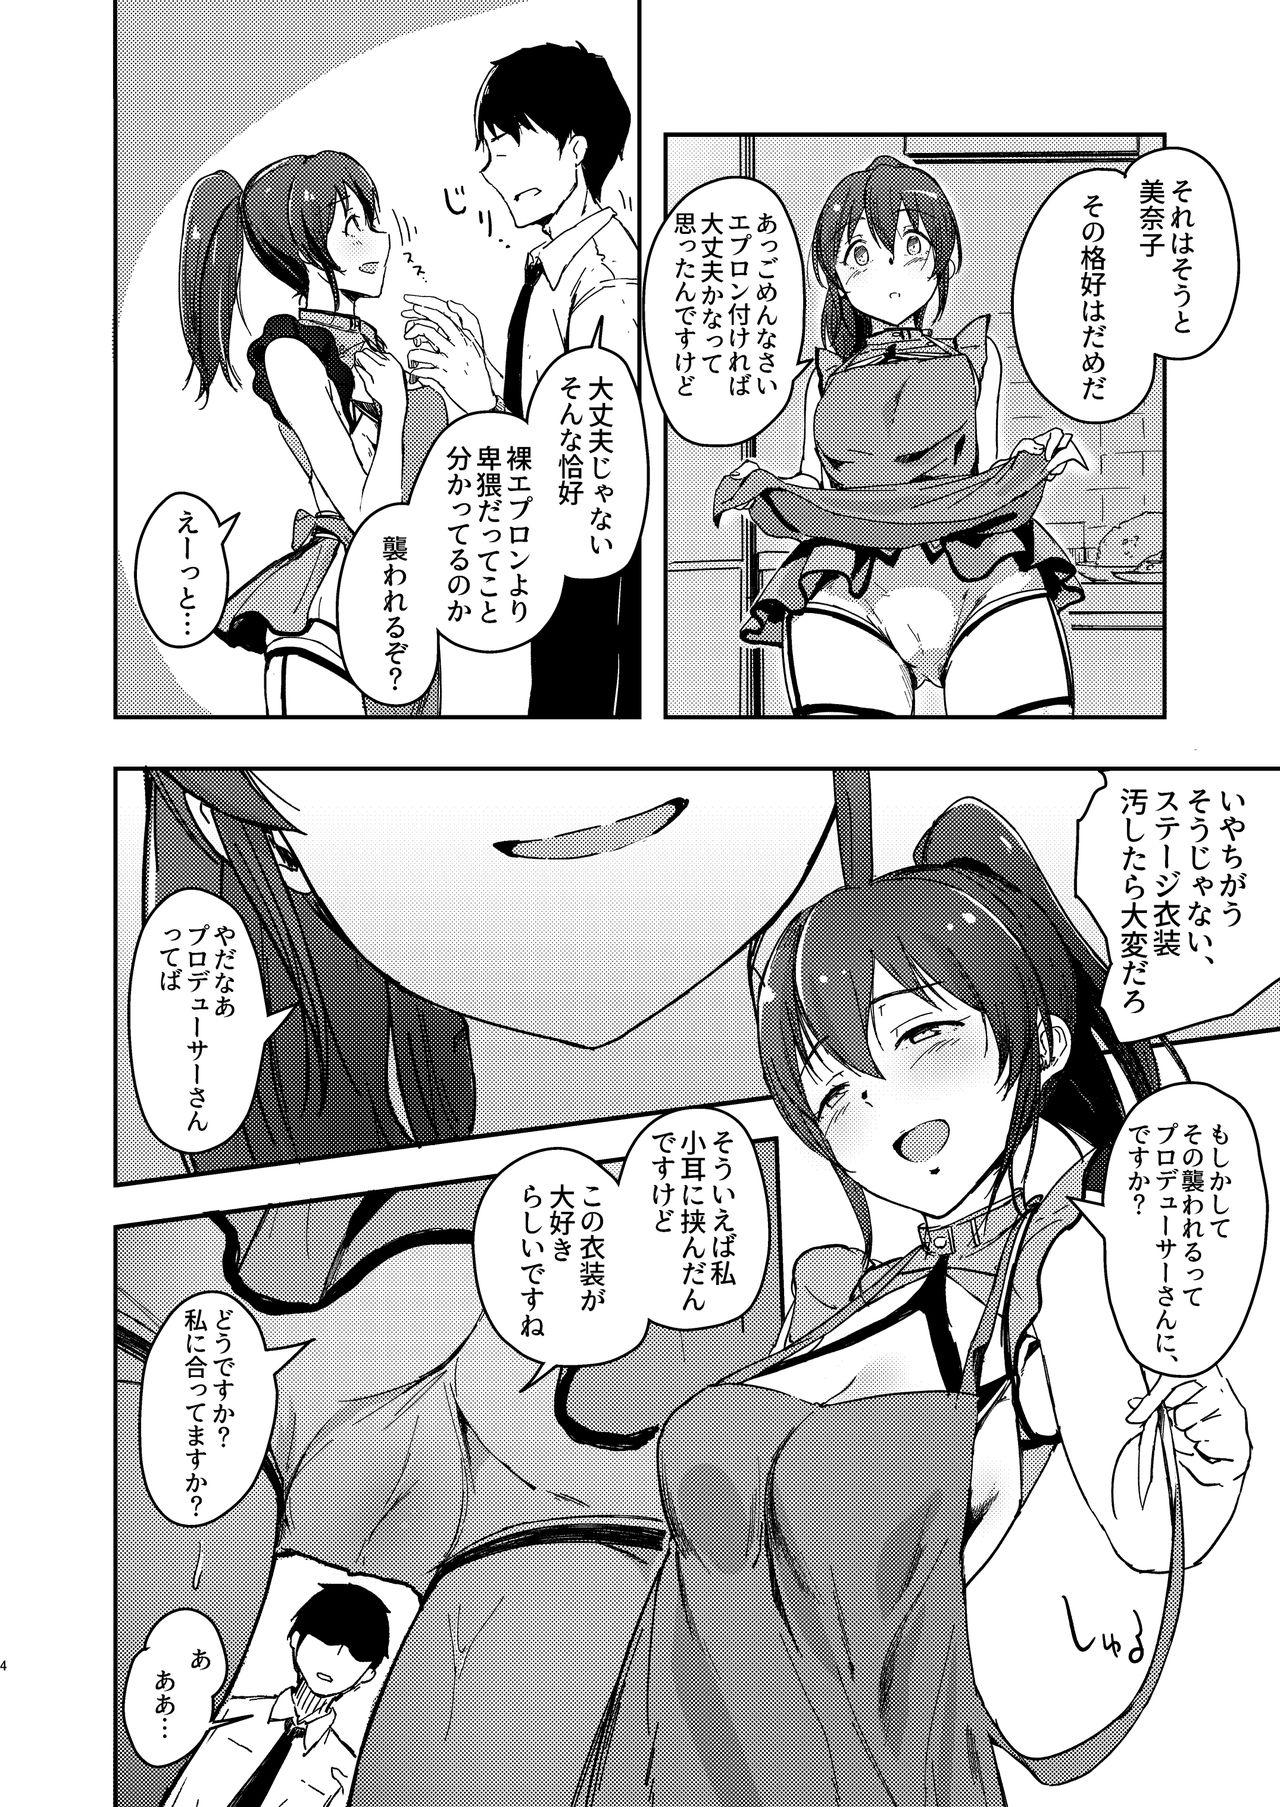 8teenxxx TOP! CLOVER BOOK + omake - The idolmaster Penetration - Page 3